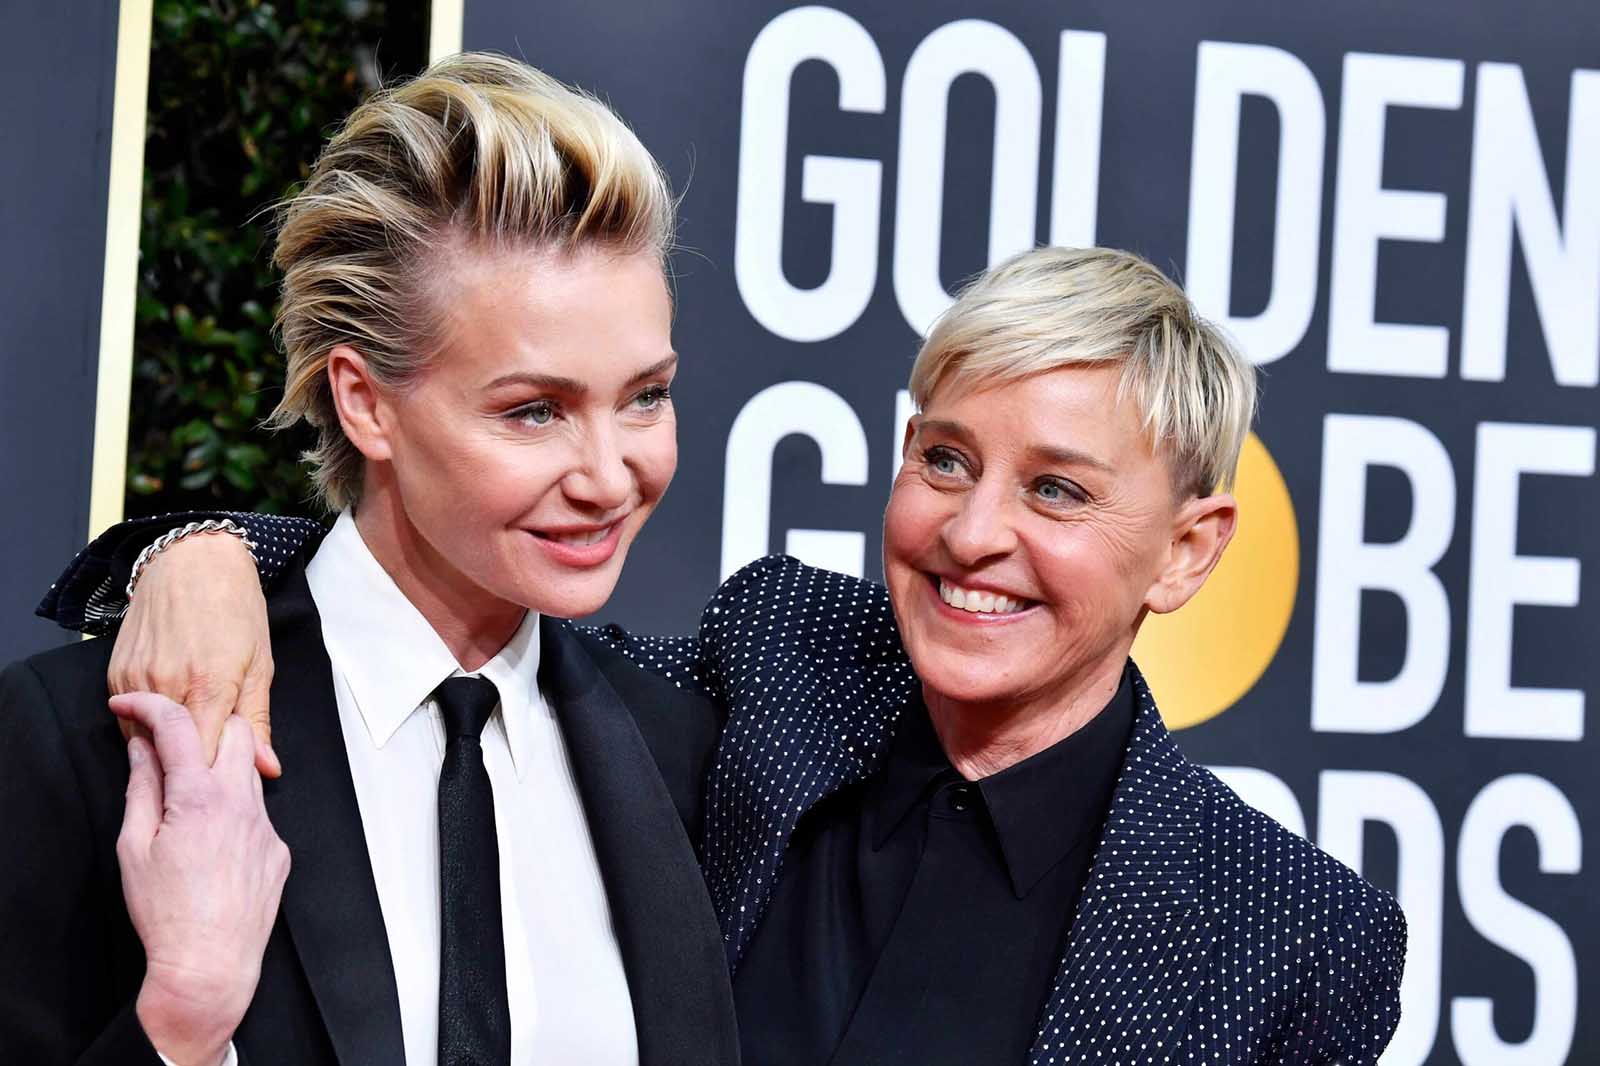 As stories continue to come out about Ellen DeGeneres being mean, many of her celebrity friends and co-workers are coming to her defense.